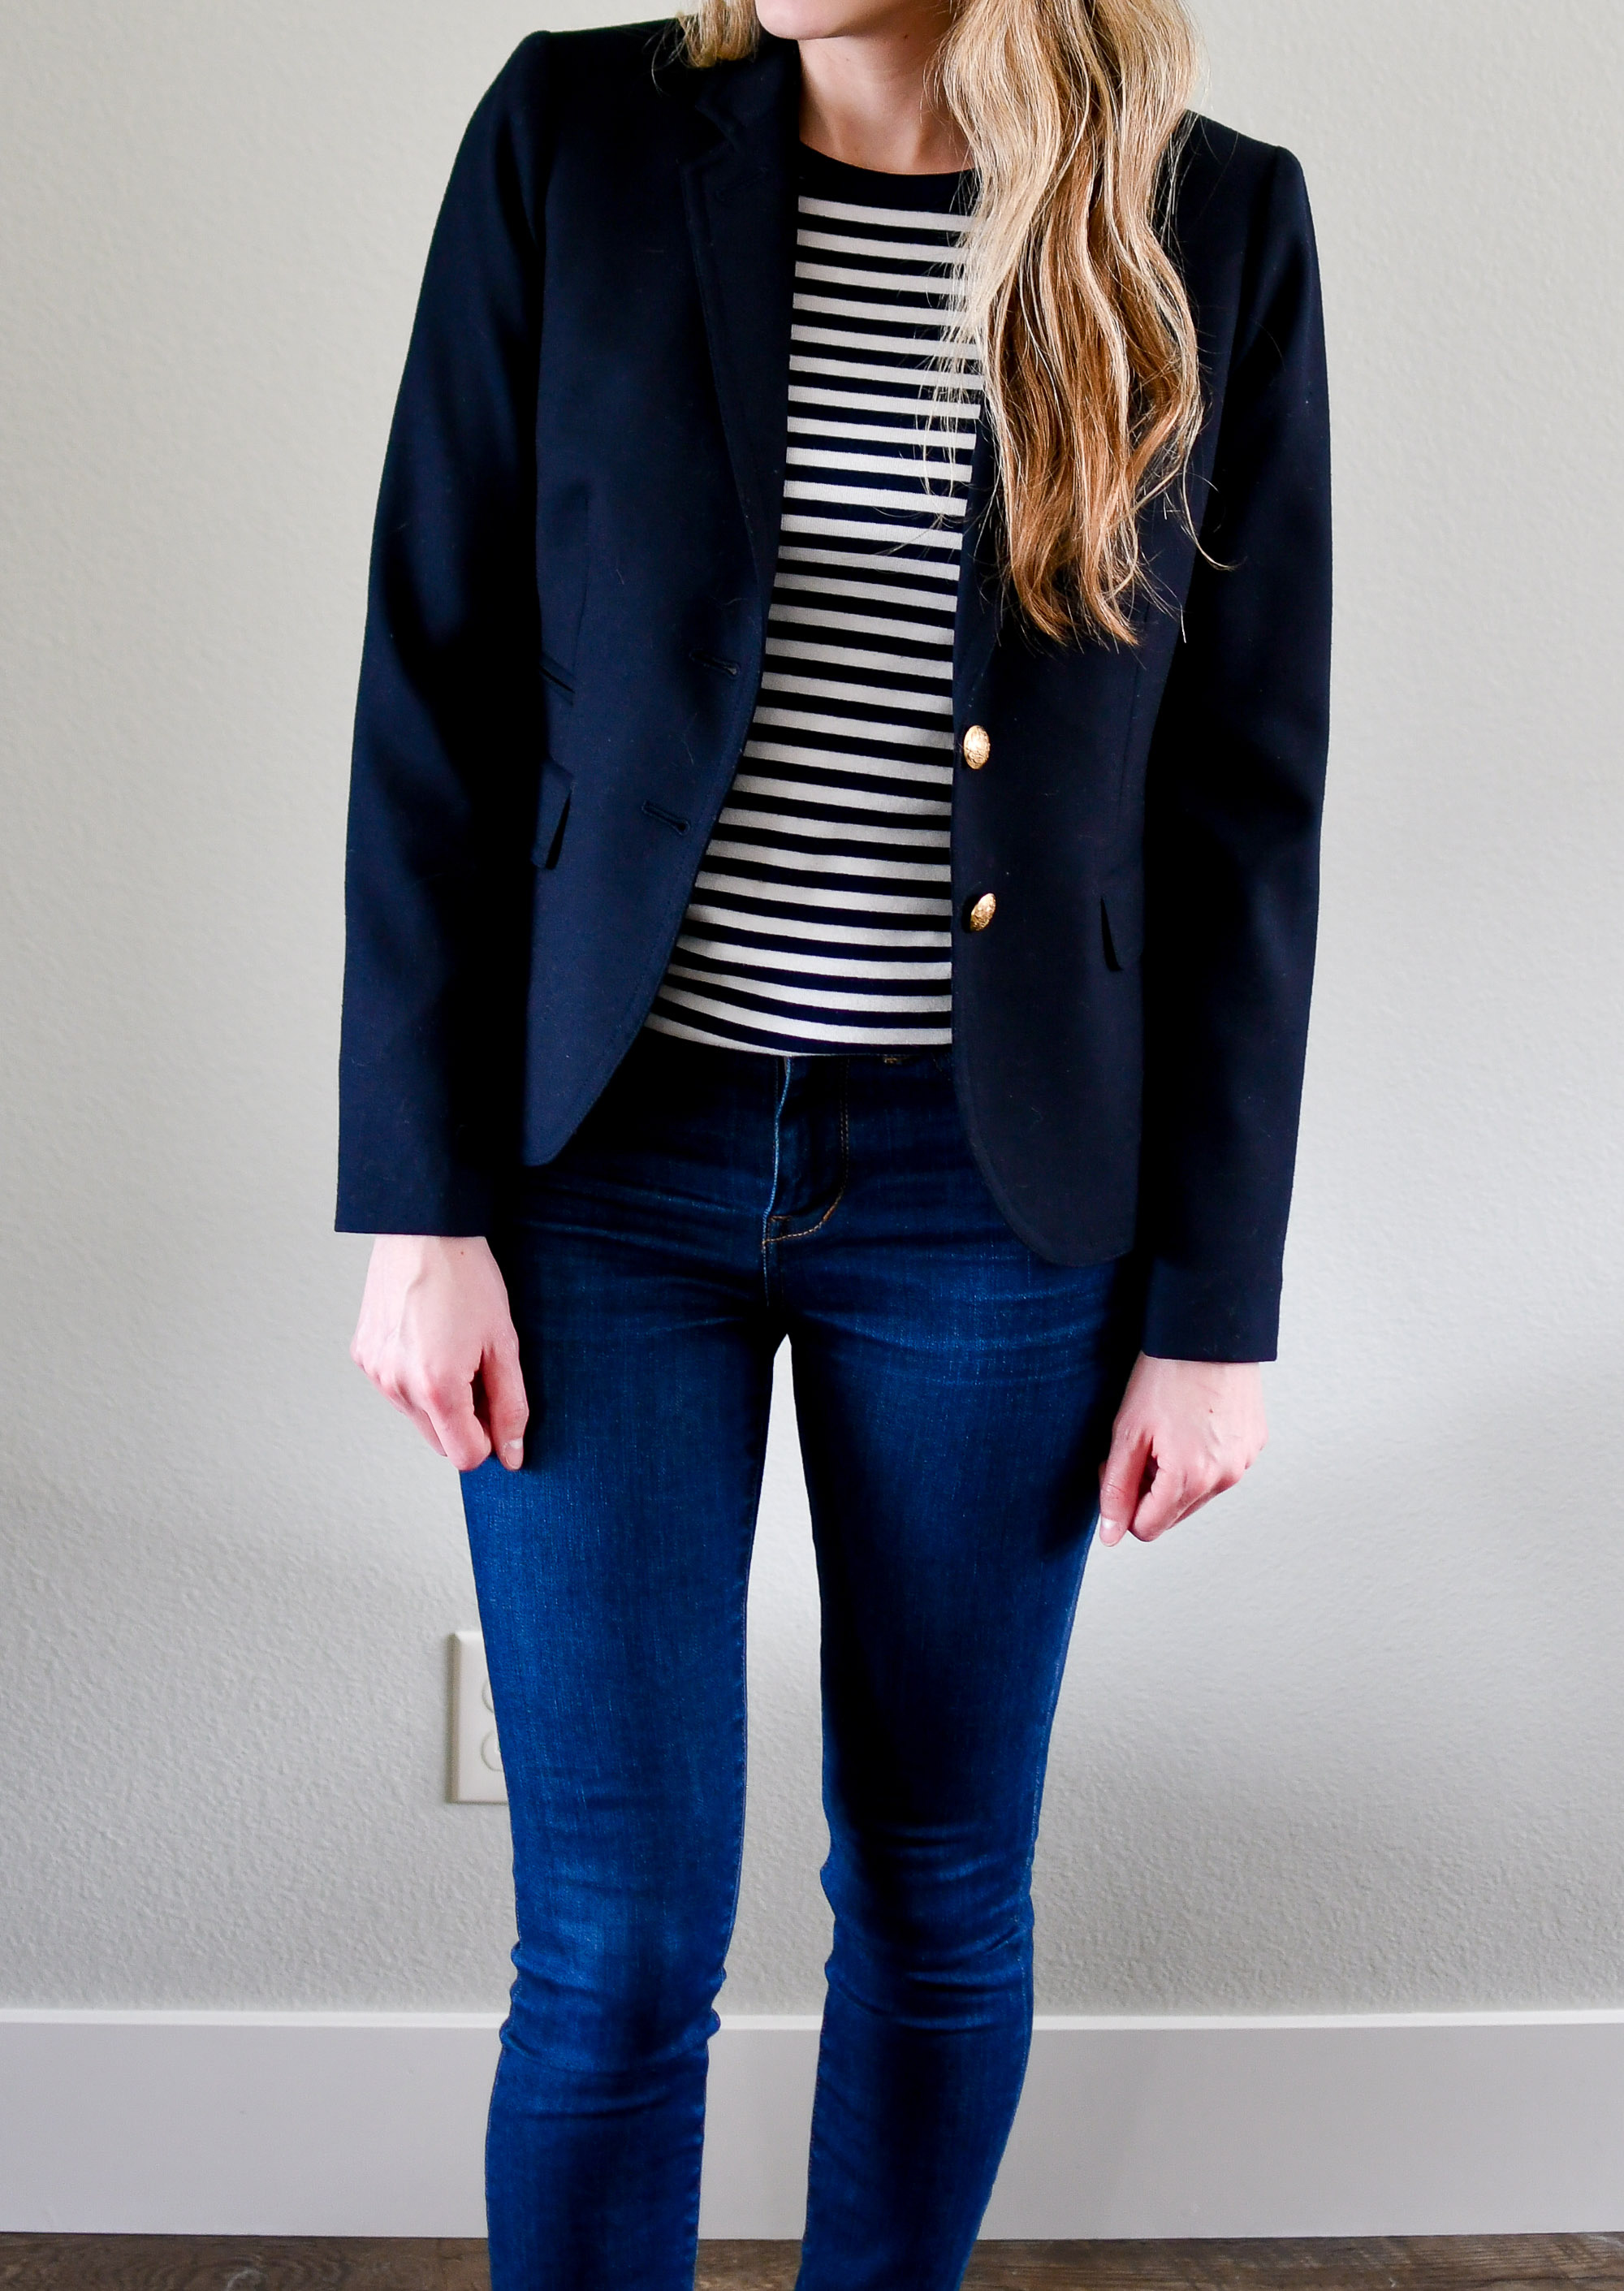 J.Crew Schoolboy blazer work outfit with striped tee — Cotton Cashmere Cat Hair